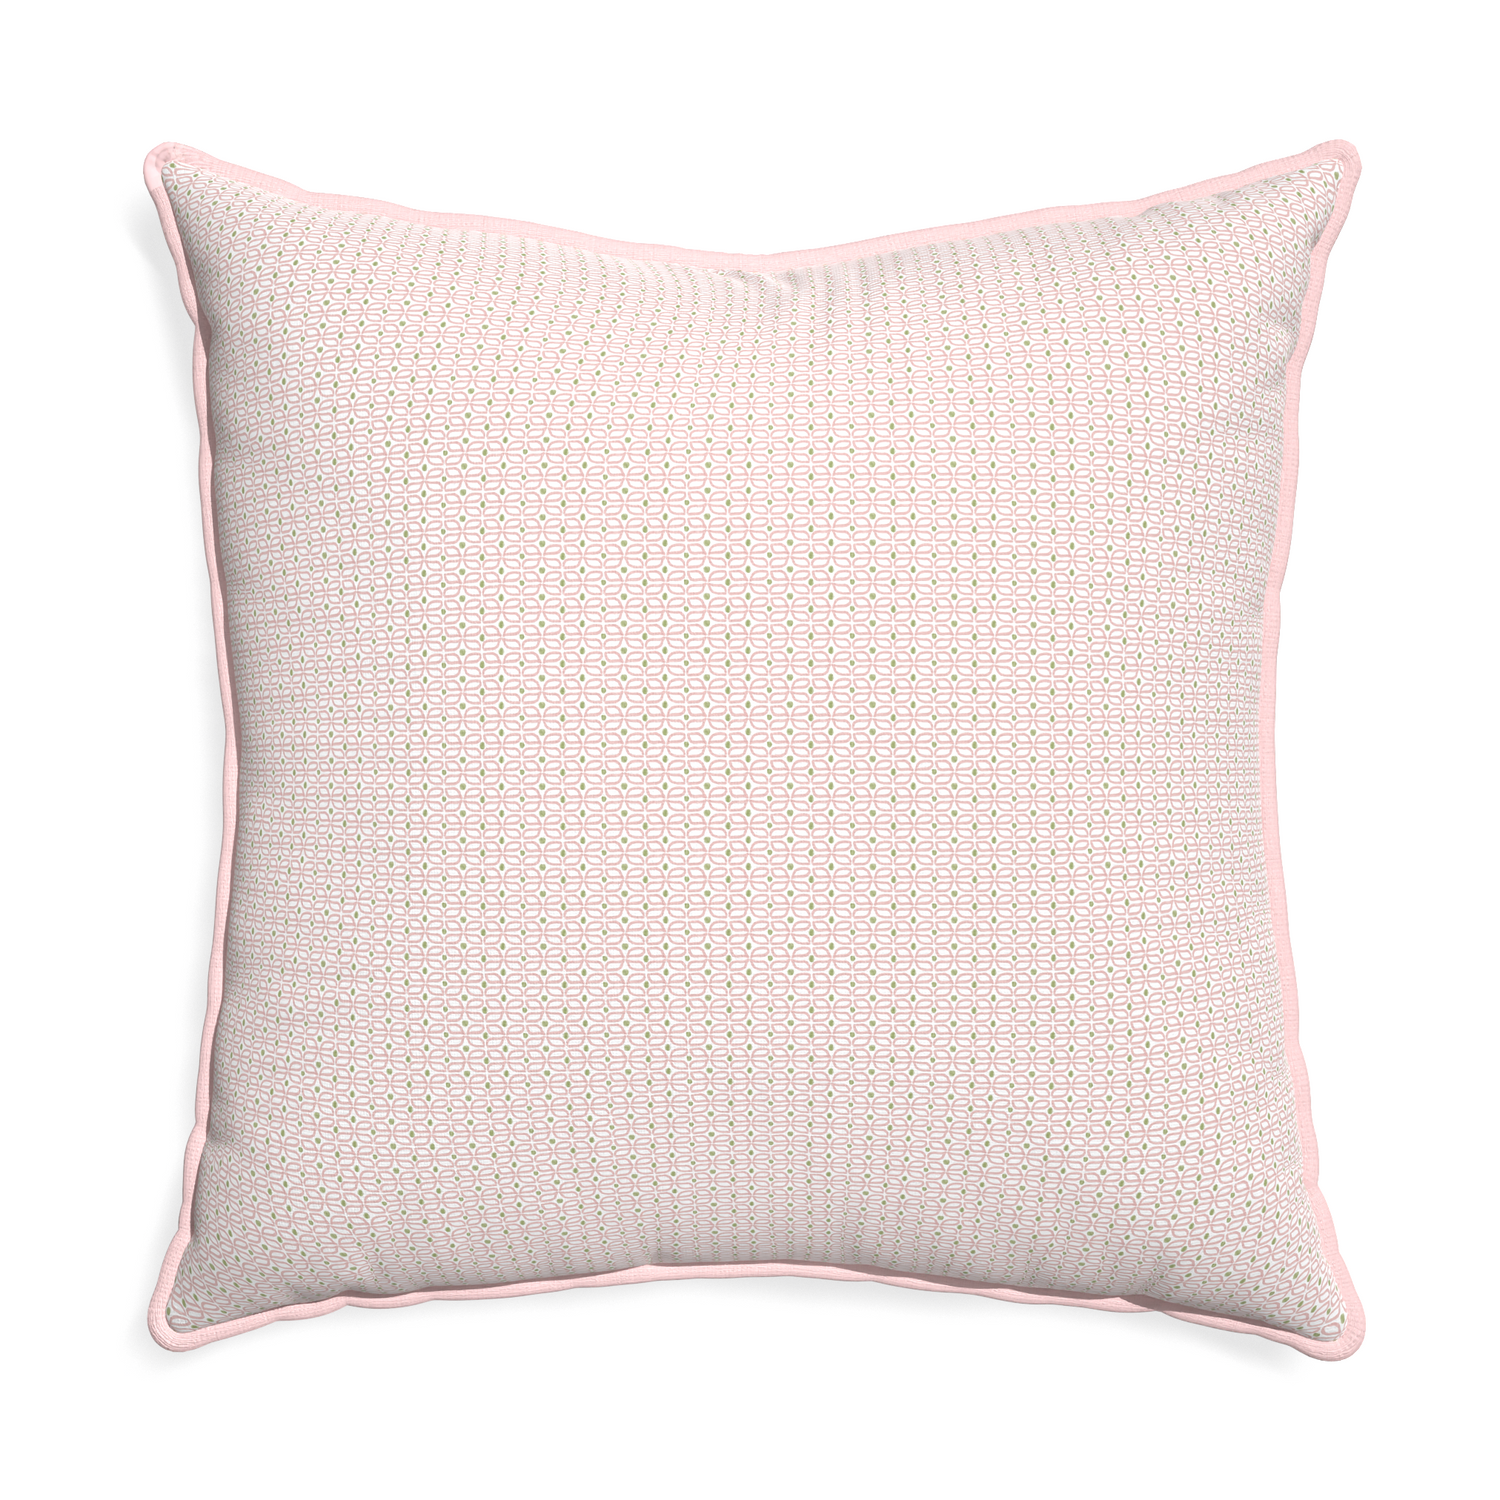 Euro-sham loomi pink custom pillow with petal piping on white background